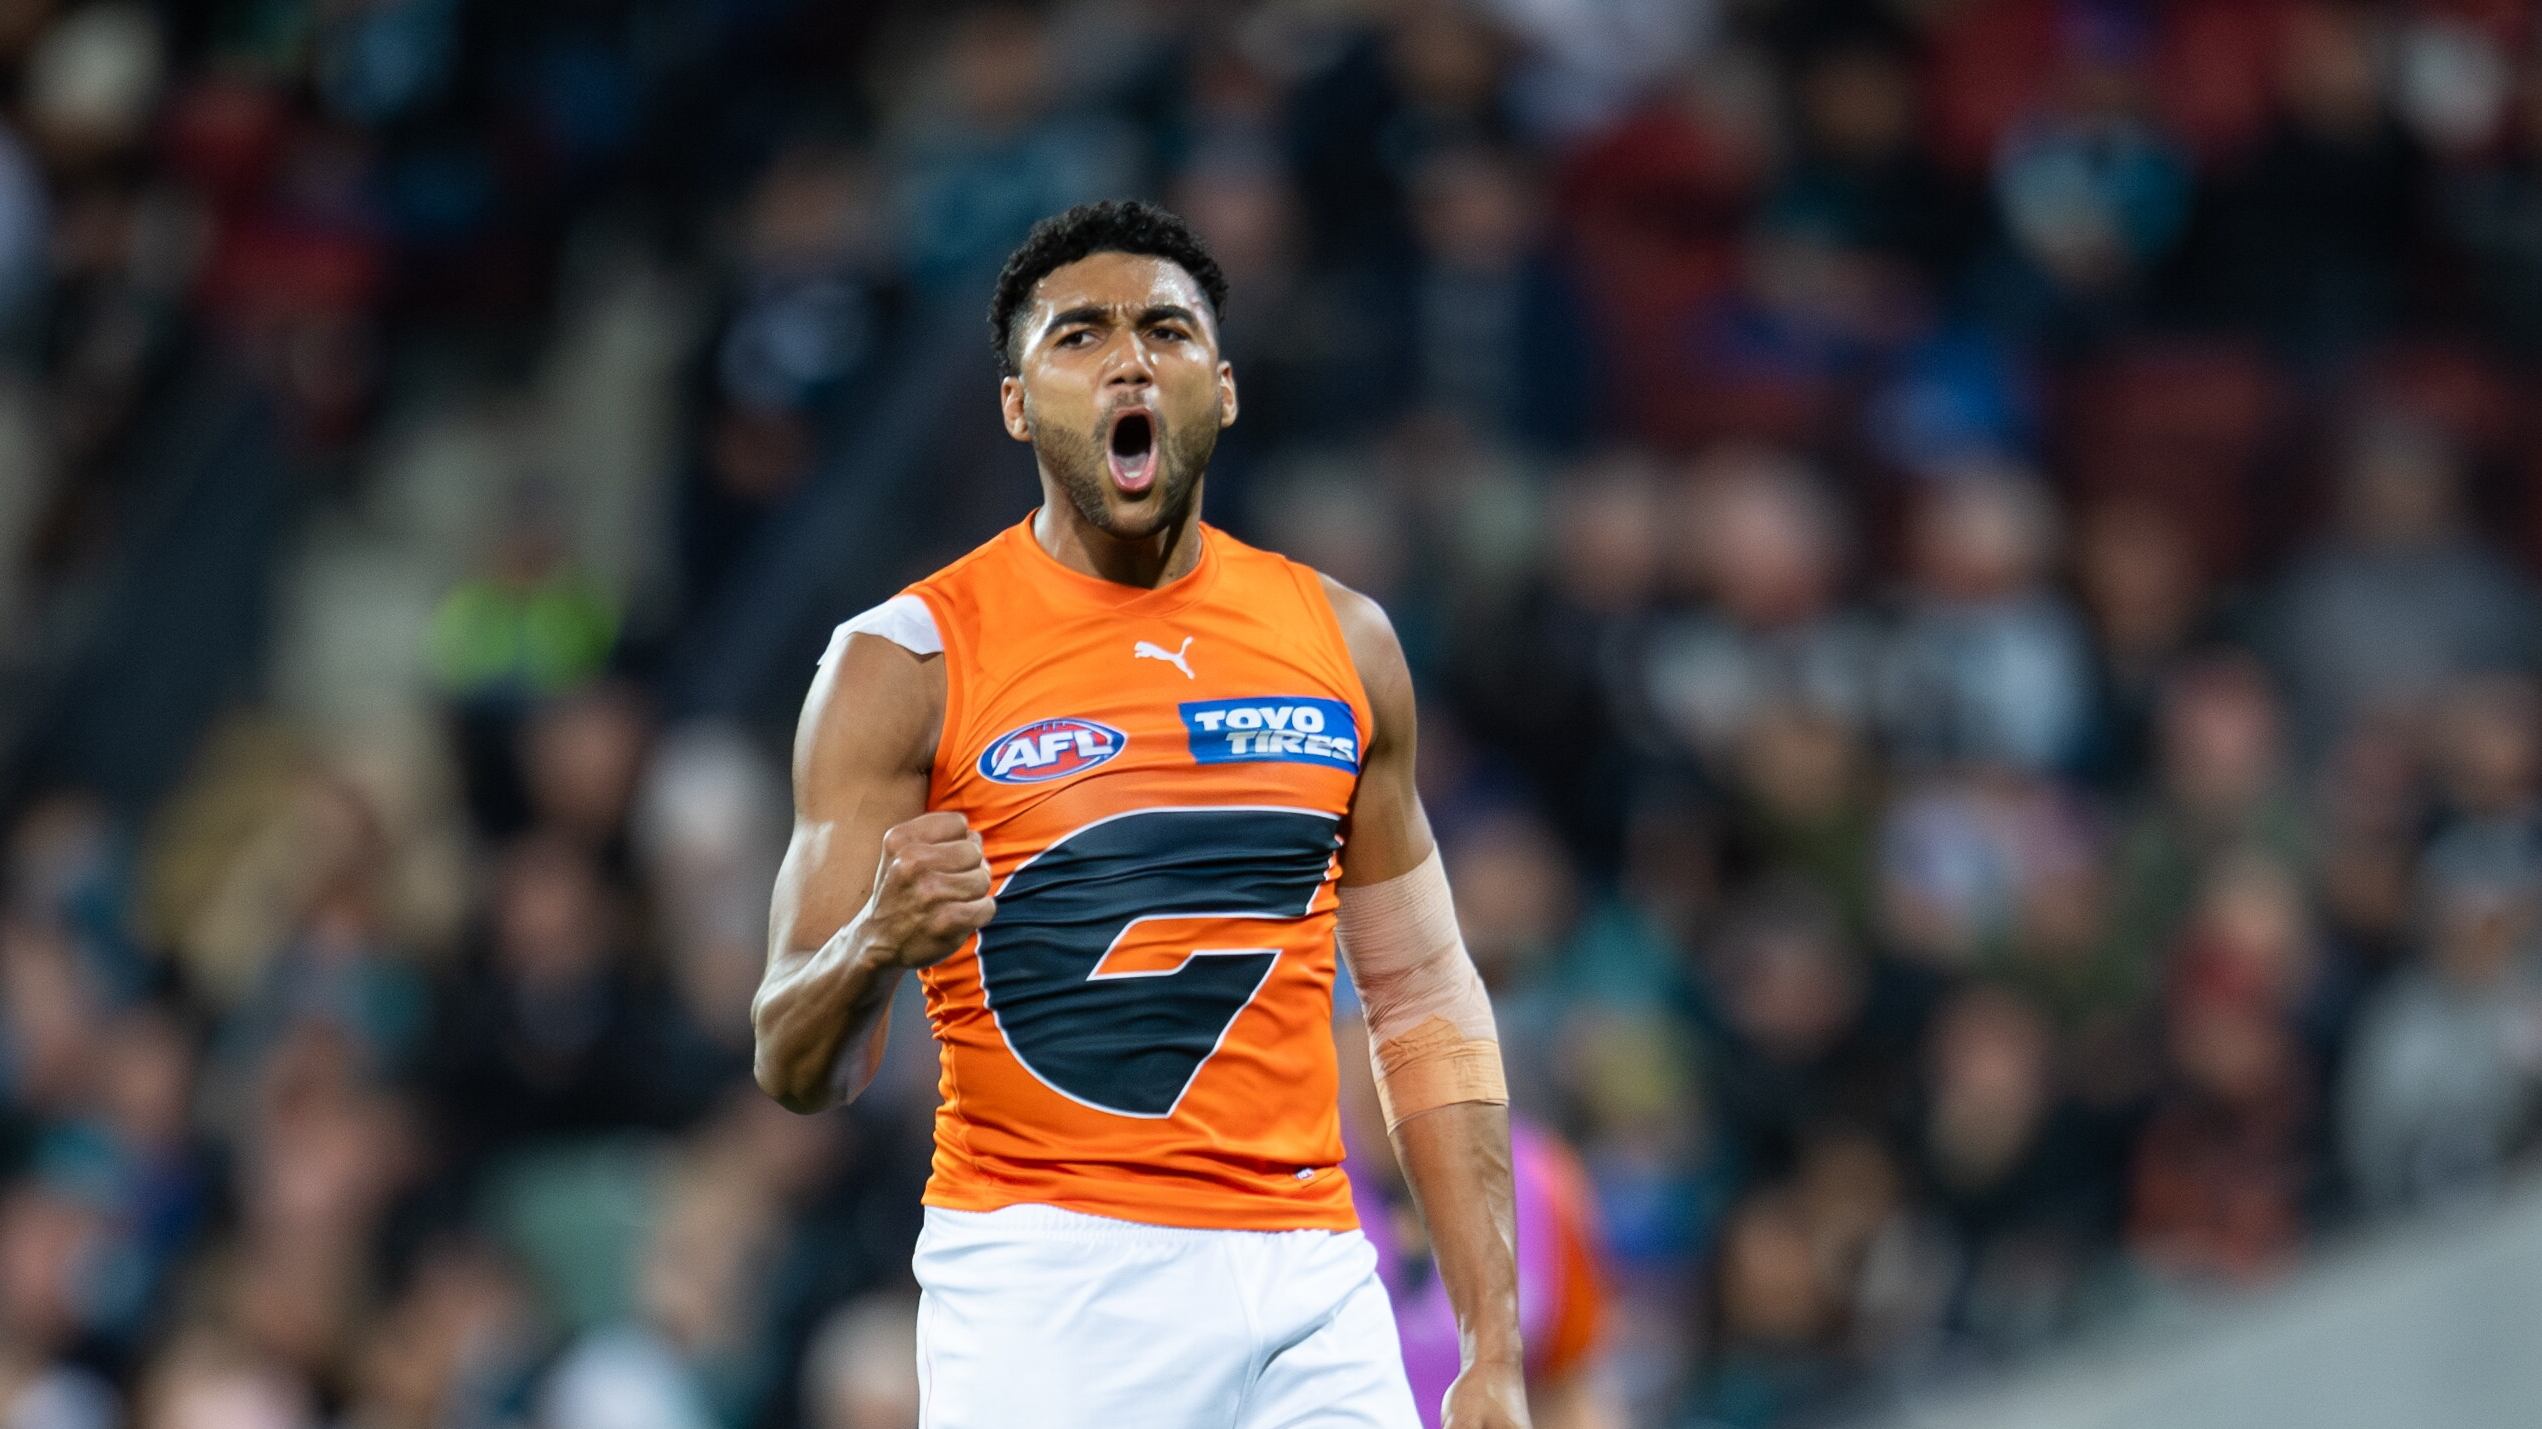 Callum Brown played a central role GWS Giants' AFL Finals win over Port Adelaide on Saturday